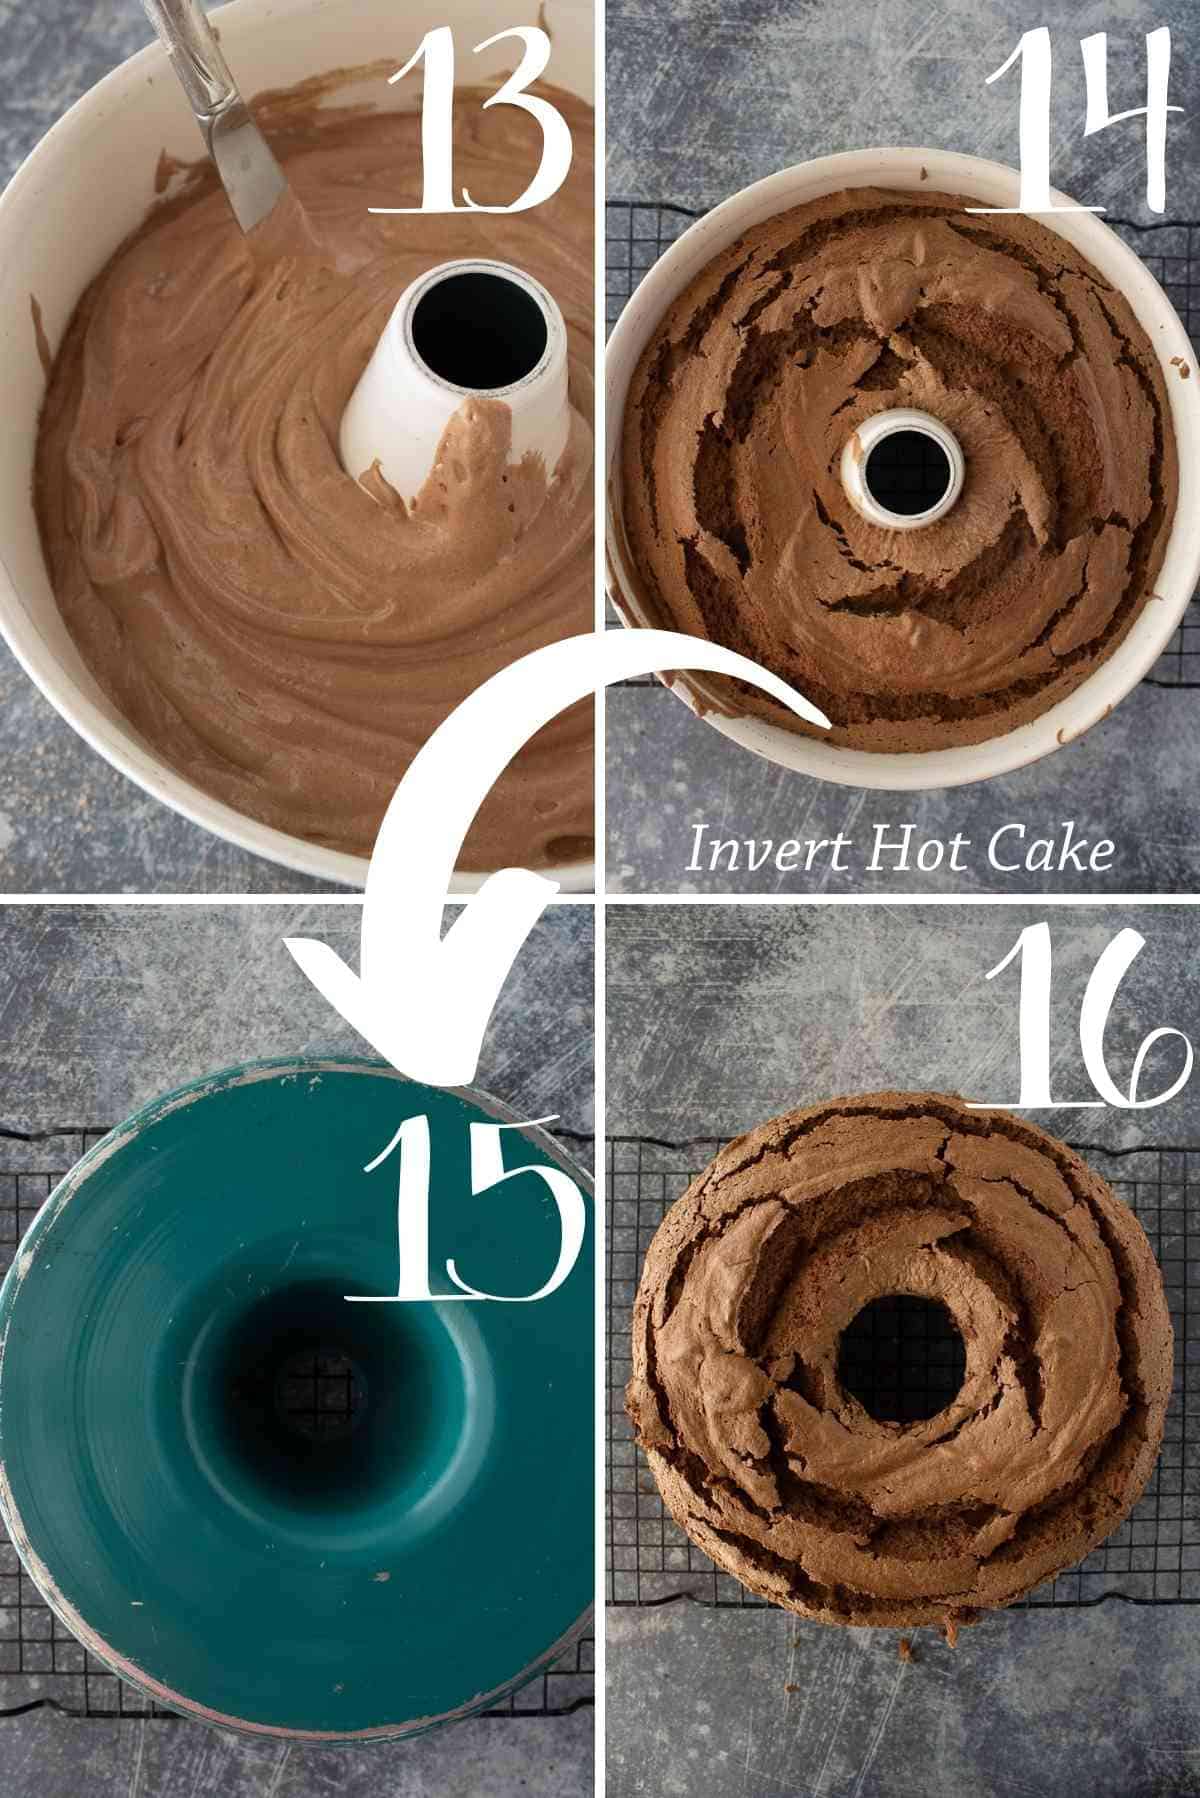 Spread batter in tube pan, bake, invert and release the cake.